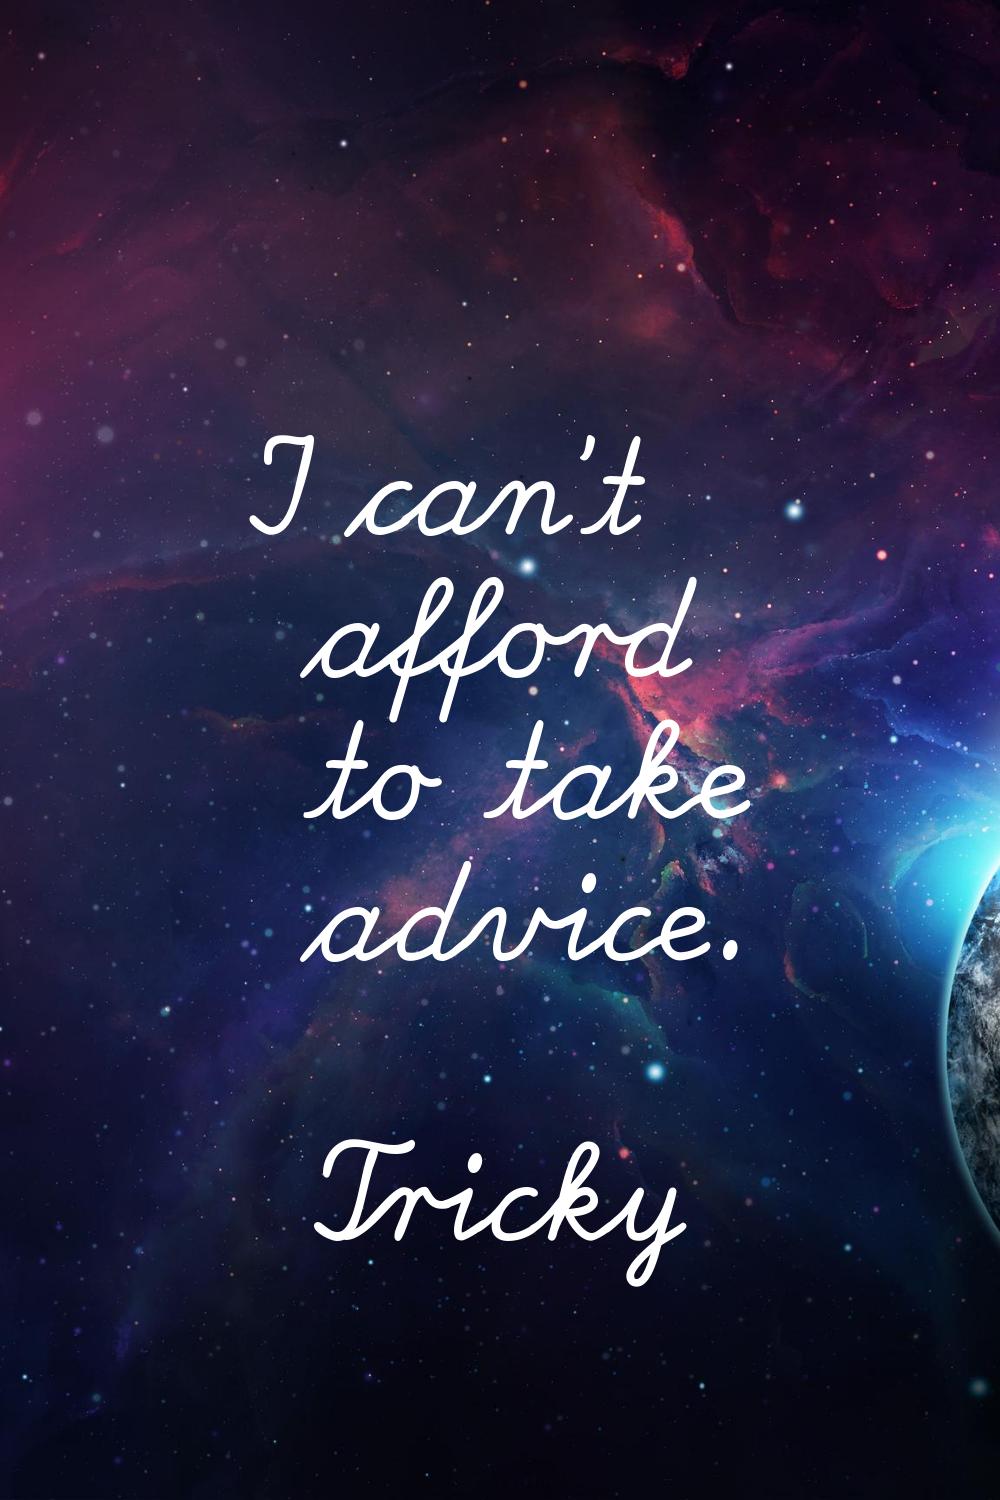 I can't afford to take advice.